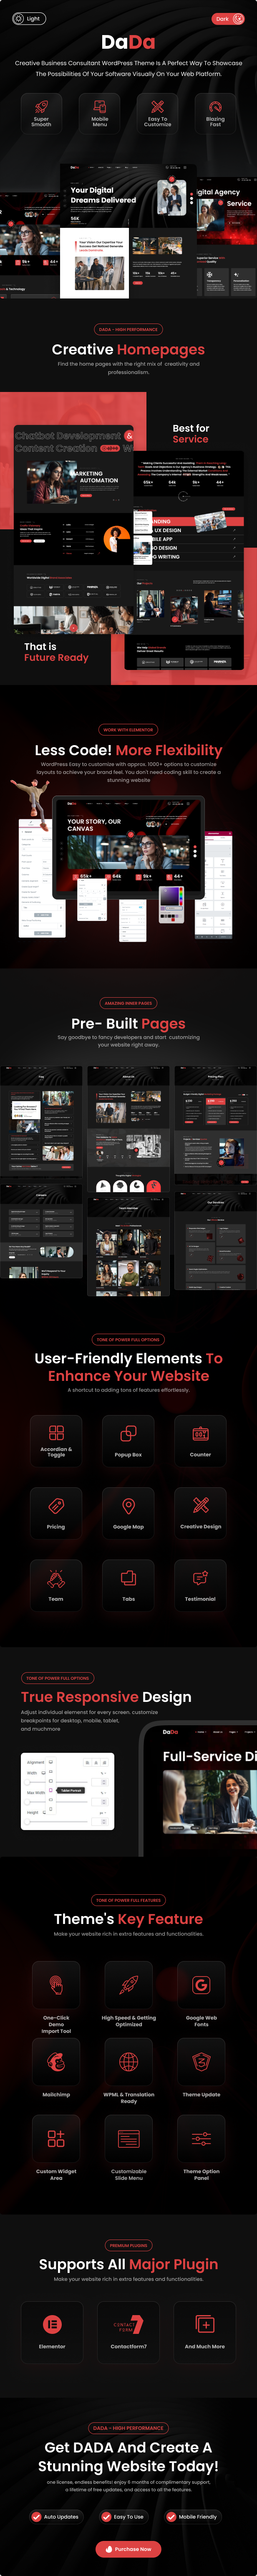 DaDa - Business Consulting Theme - 1